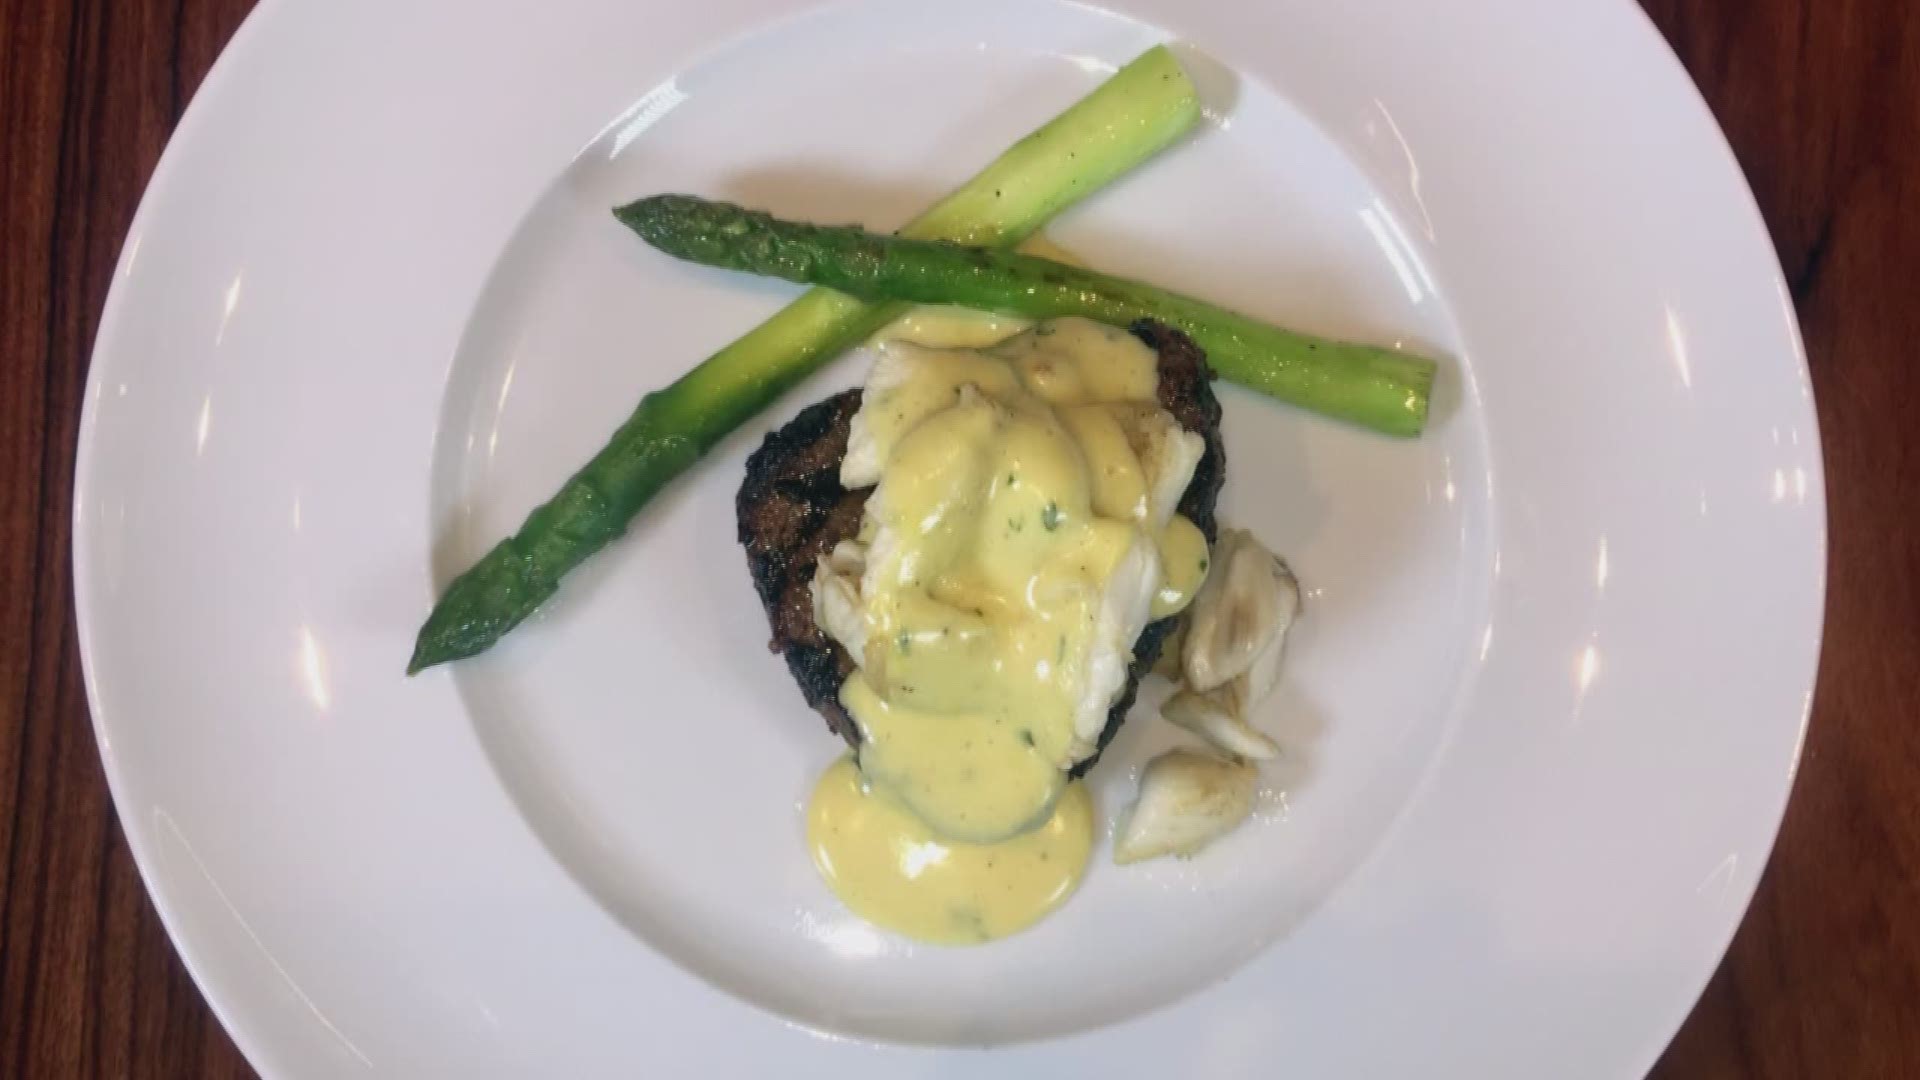 This week the chefs at the Rosewater Grill cooks up the delicious Steak Oscar!